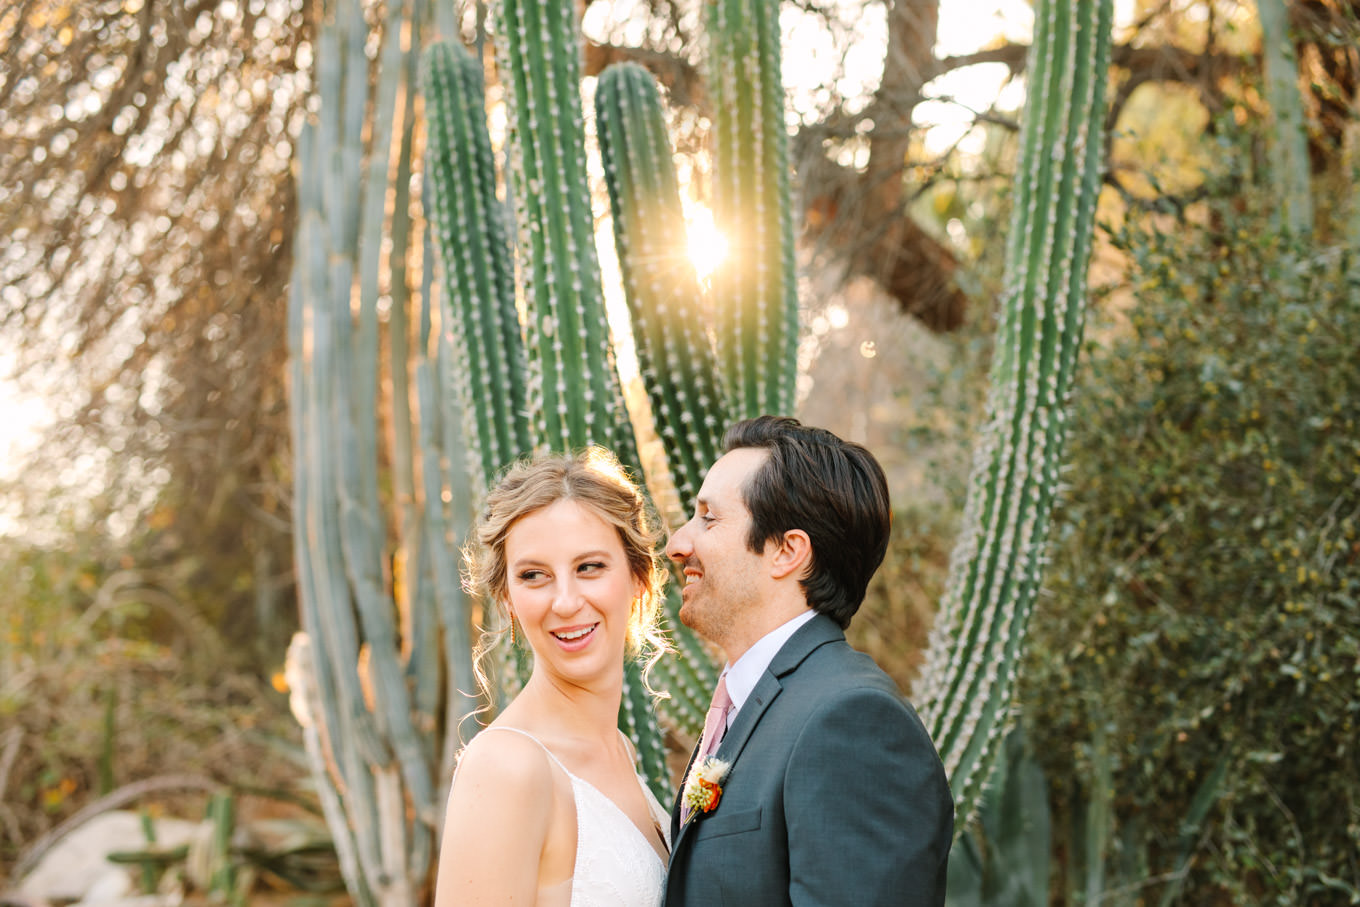 Wedding portrait of bride and groom in cactus garden | Living Desert Zoo & Gardens wedding with unique details | Elevated and colorful wedding photography for fun-loving couples in Southern California |  #PalmSprings #palmspringsphotographer #gardenwedding #palmspringswedding  Source: Mary Costa Photography | Los Angeles wedding photographer 